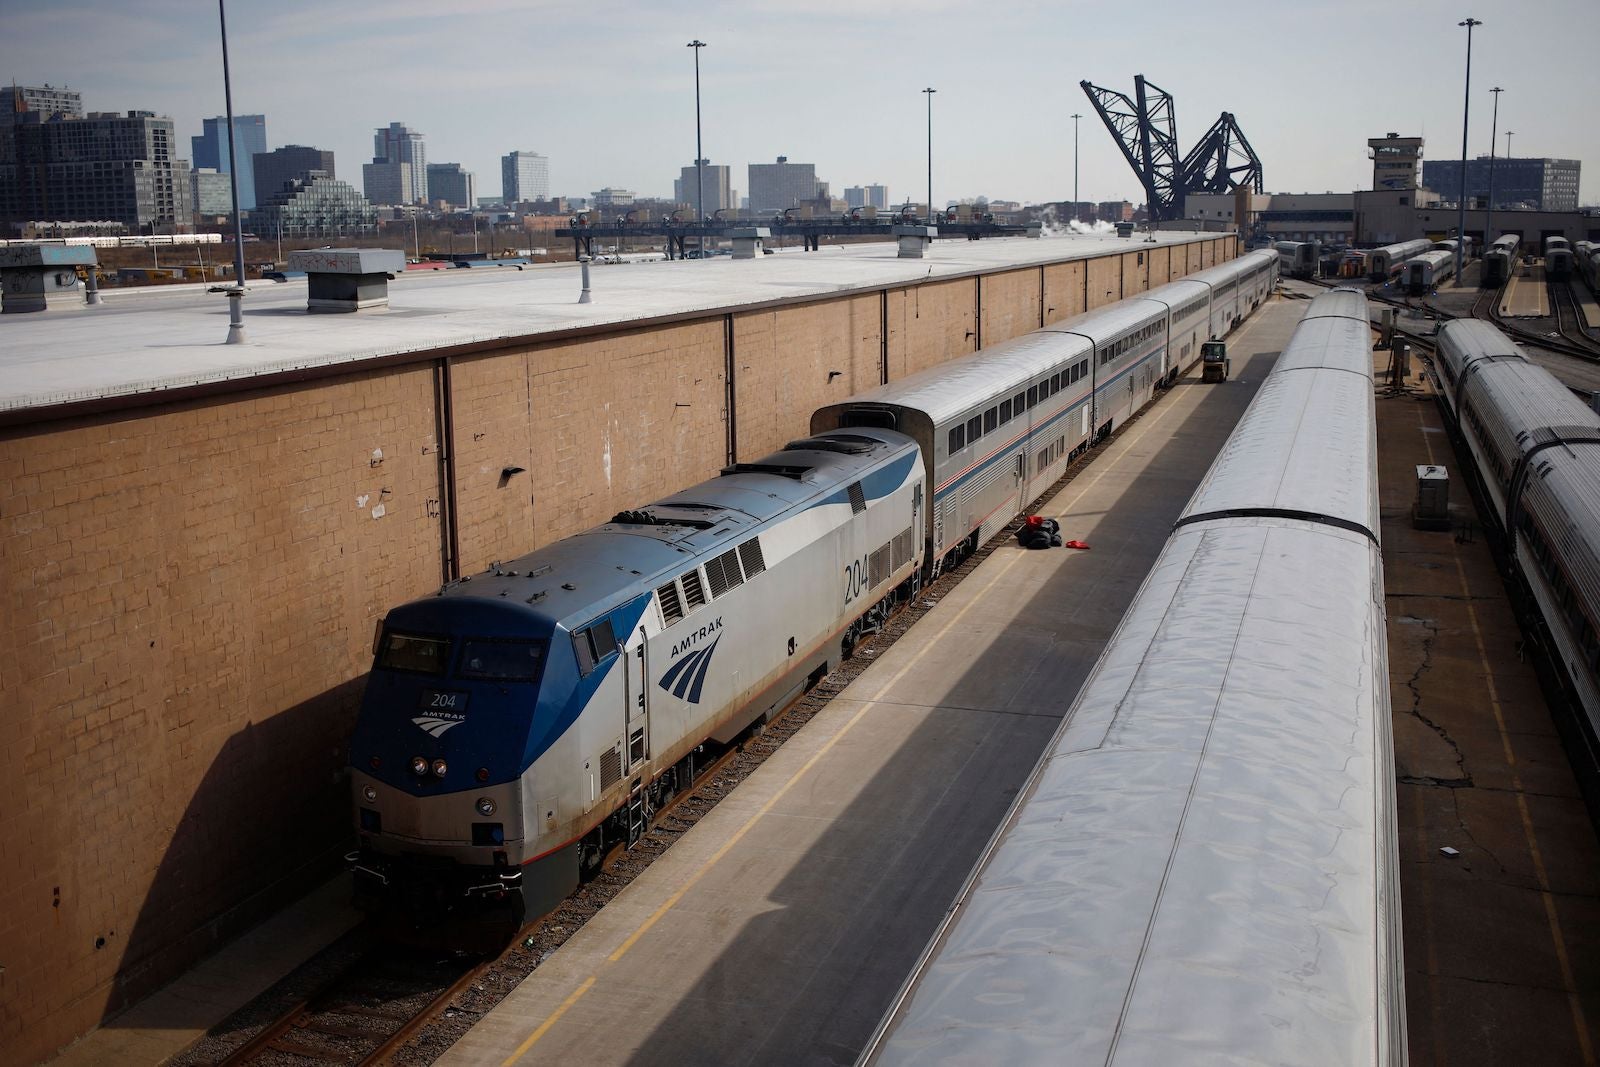 An Amtrak railroad passenger train pulls into the coach yard at Chicago Union Station in Chicago, Illinois, on March 2, 2022.